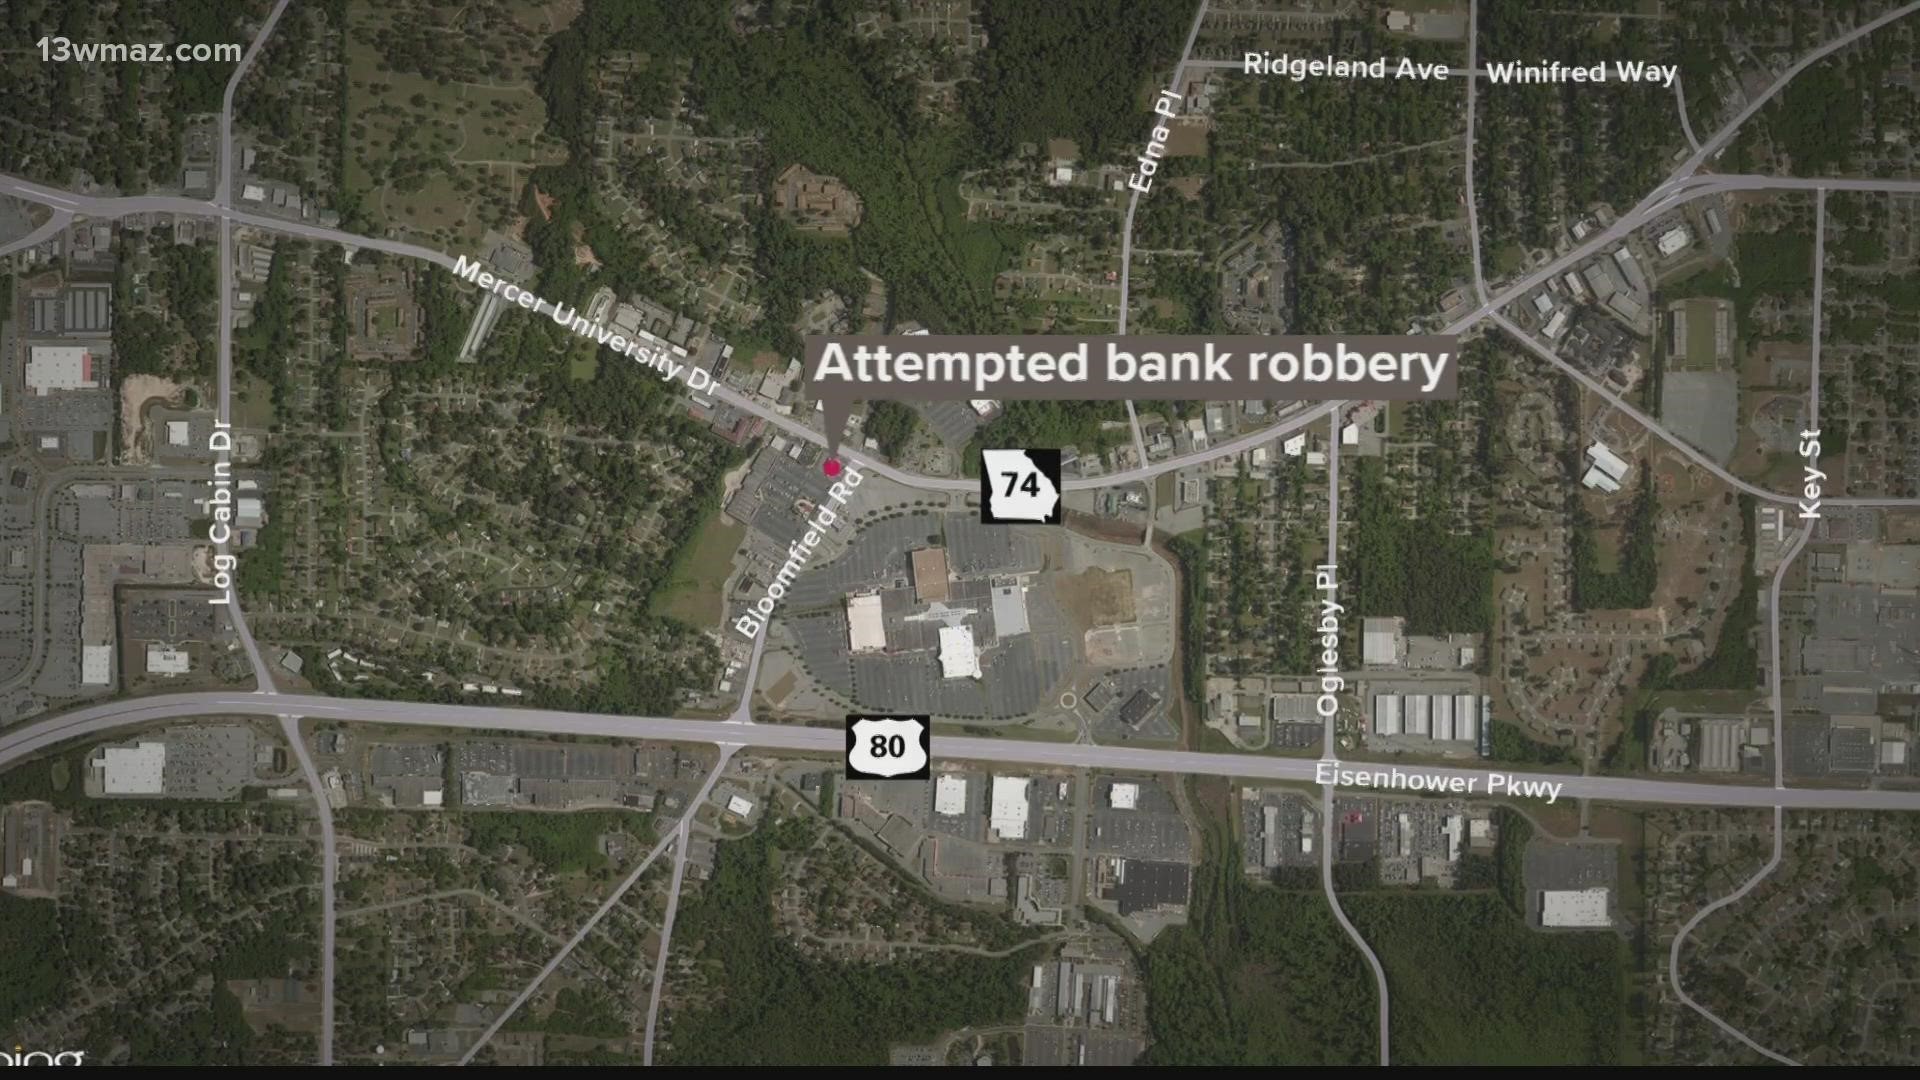 When the suspect realized that the bank employee's register was not working, he ran away.